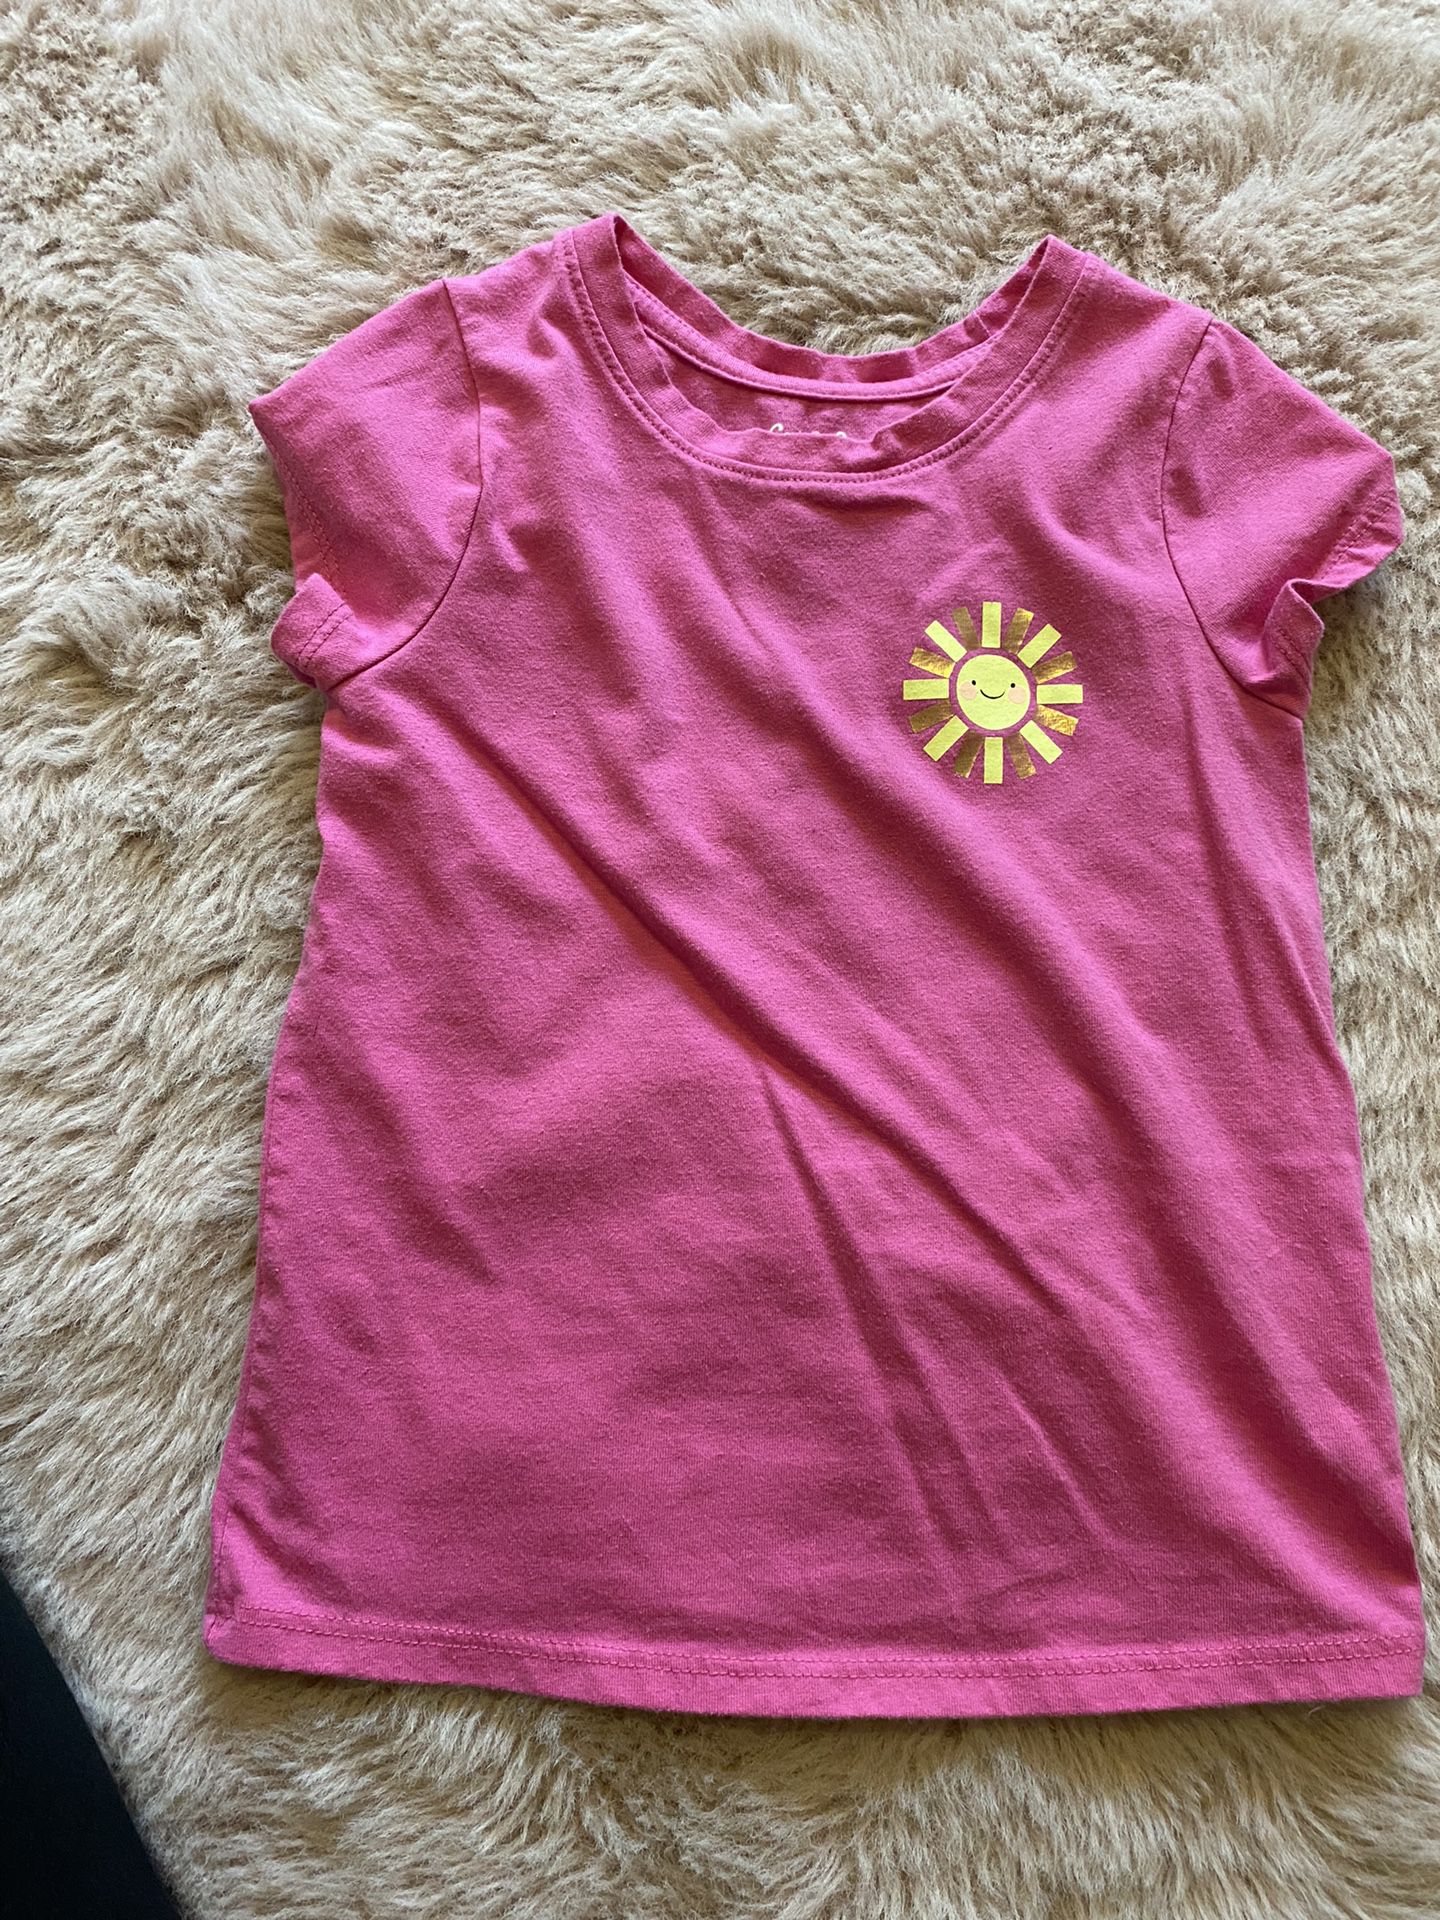 Cat & Jack Pink Toddler Shirt Size 3T for Sale in Tacoma, WA - OfferUp